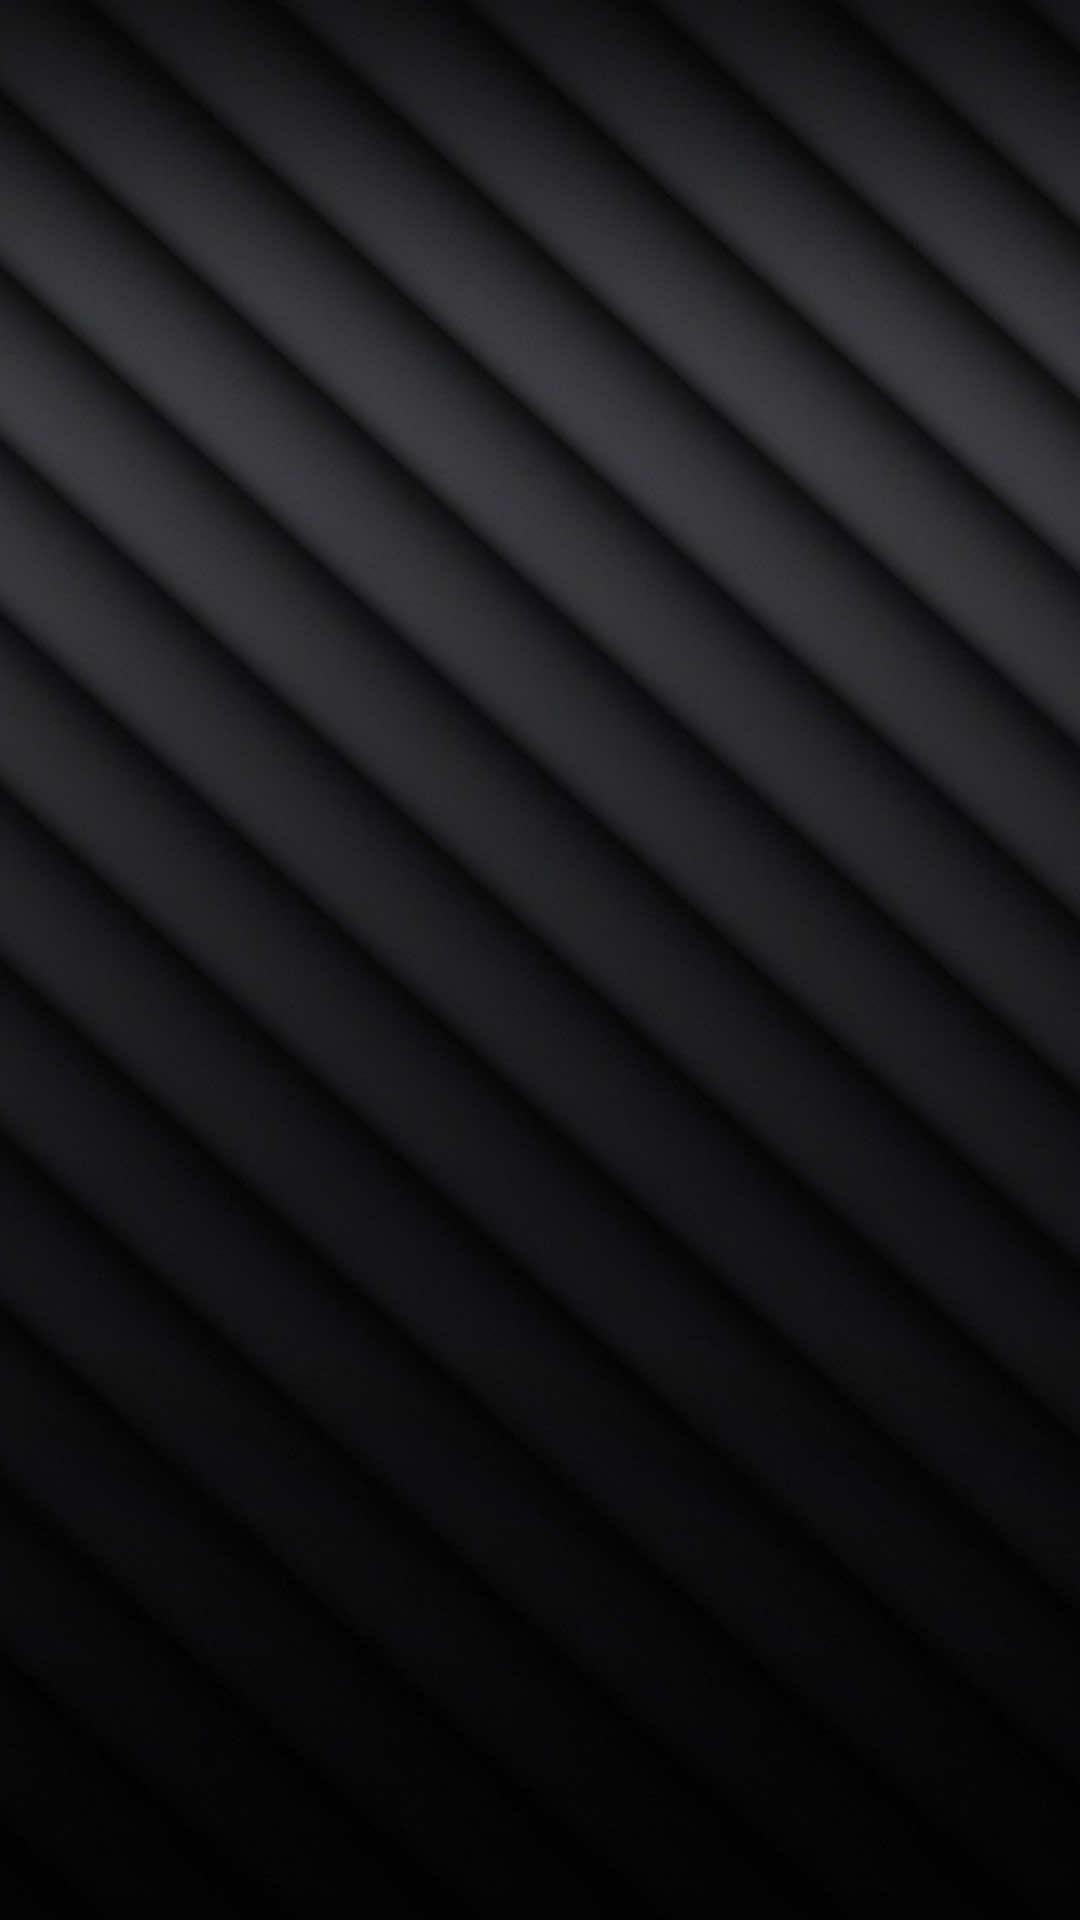 50 Black Wallpaper In Fhd For Free Download For Android Desktop And Laptops